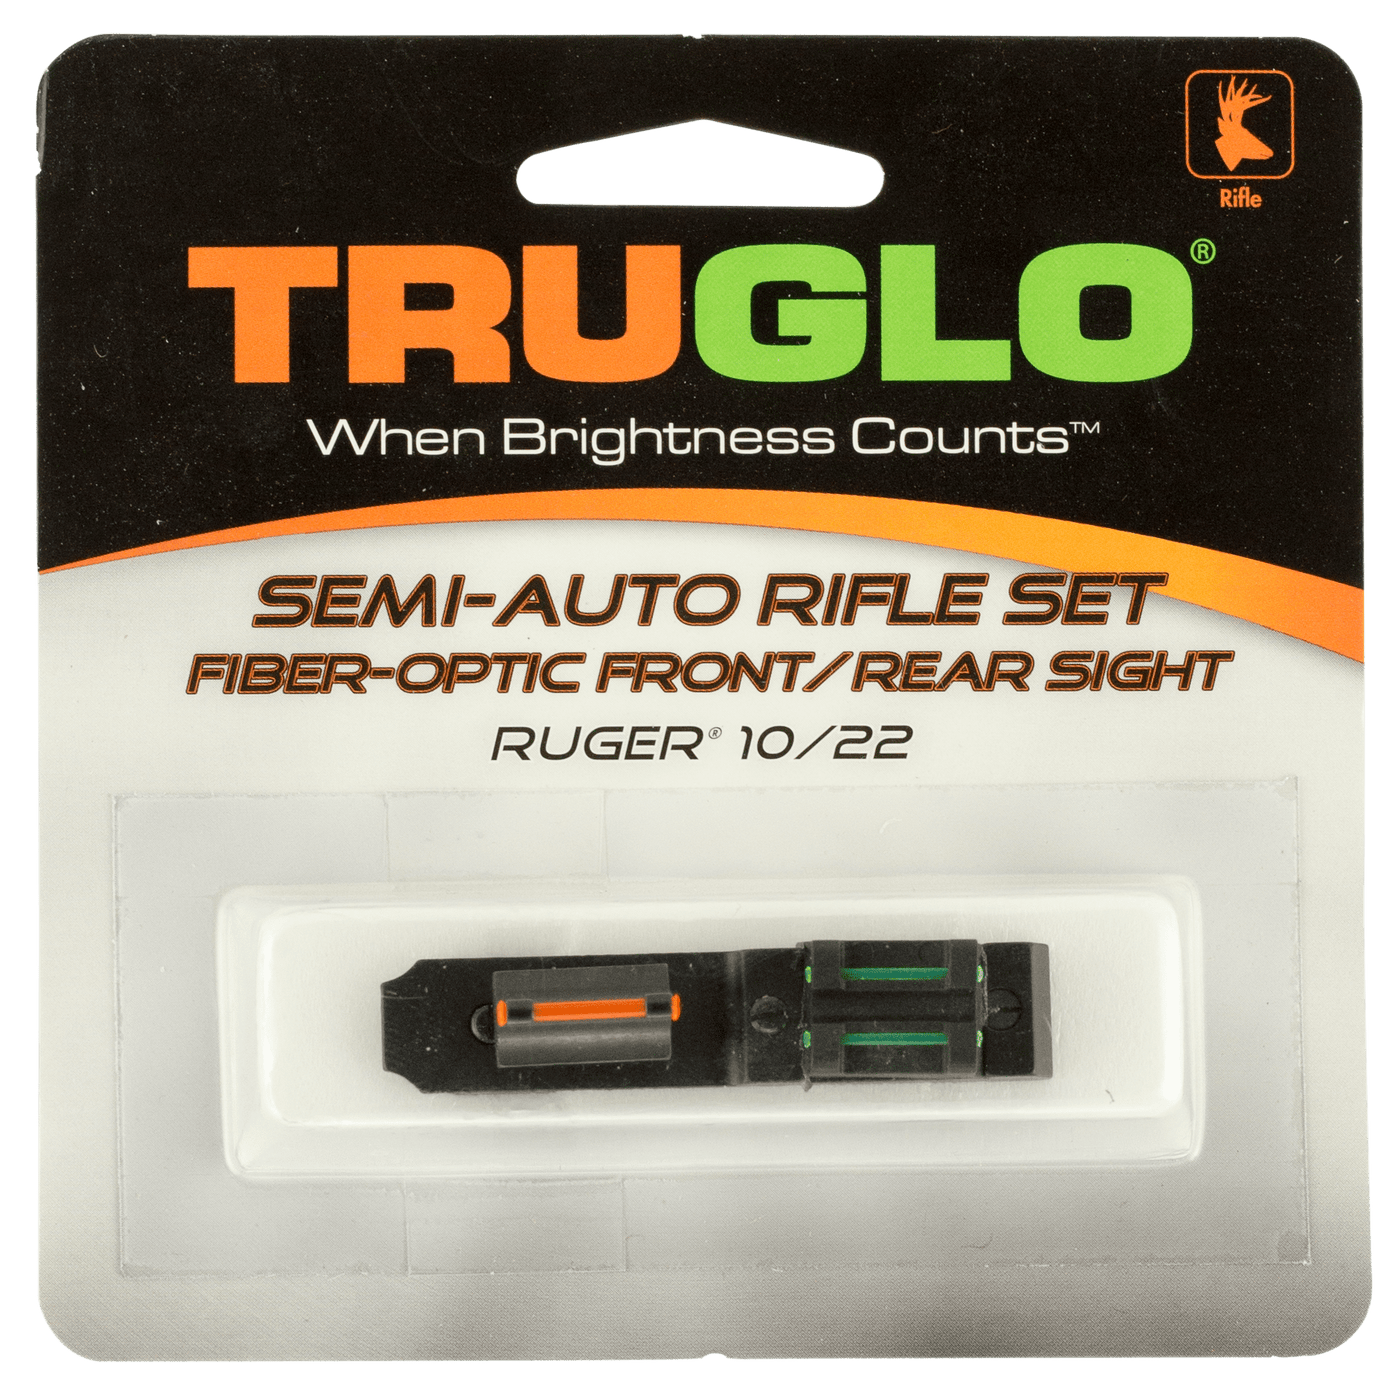 Truglo Truglo Sight Set - For Ruger 10/22 Rifles Sights Gun/bow